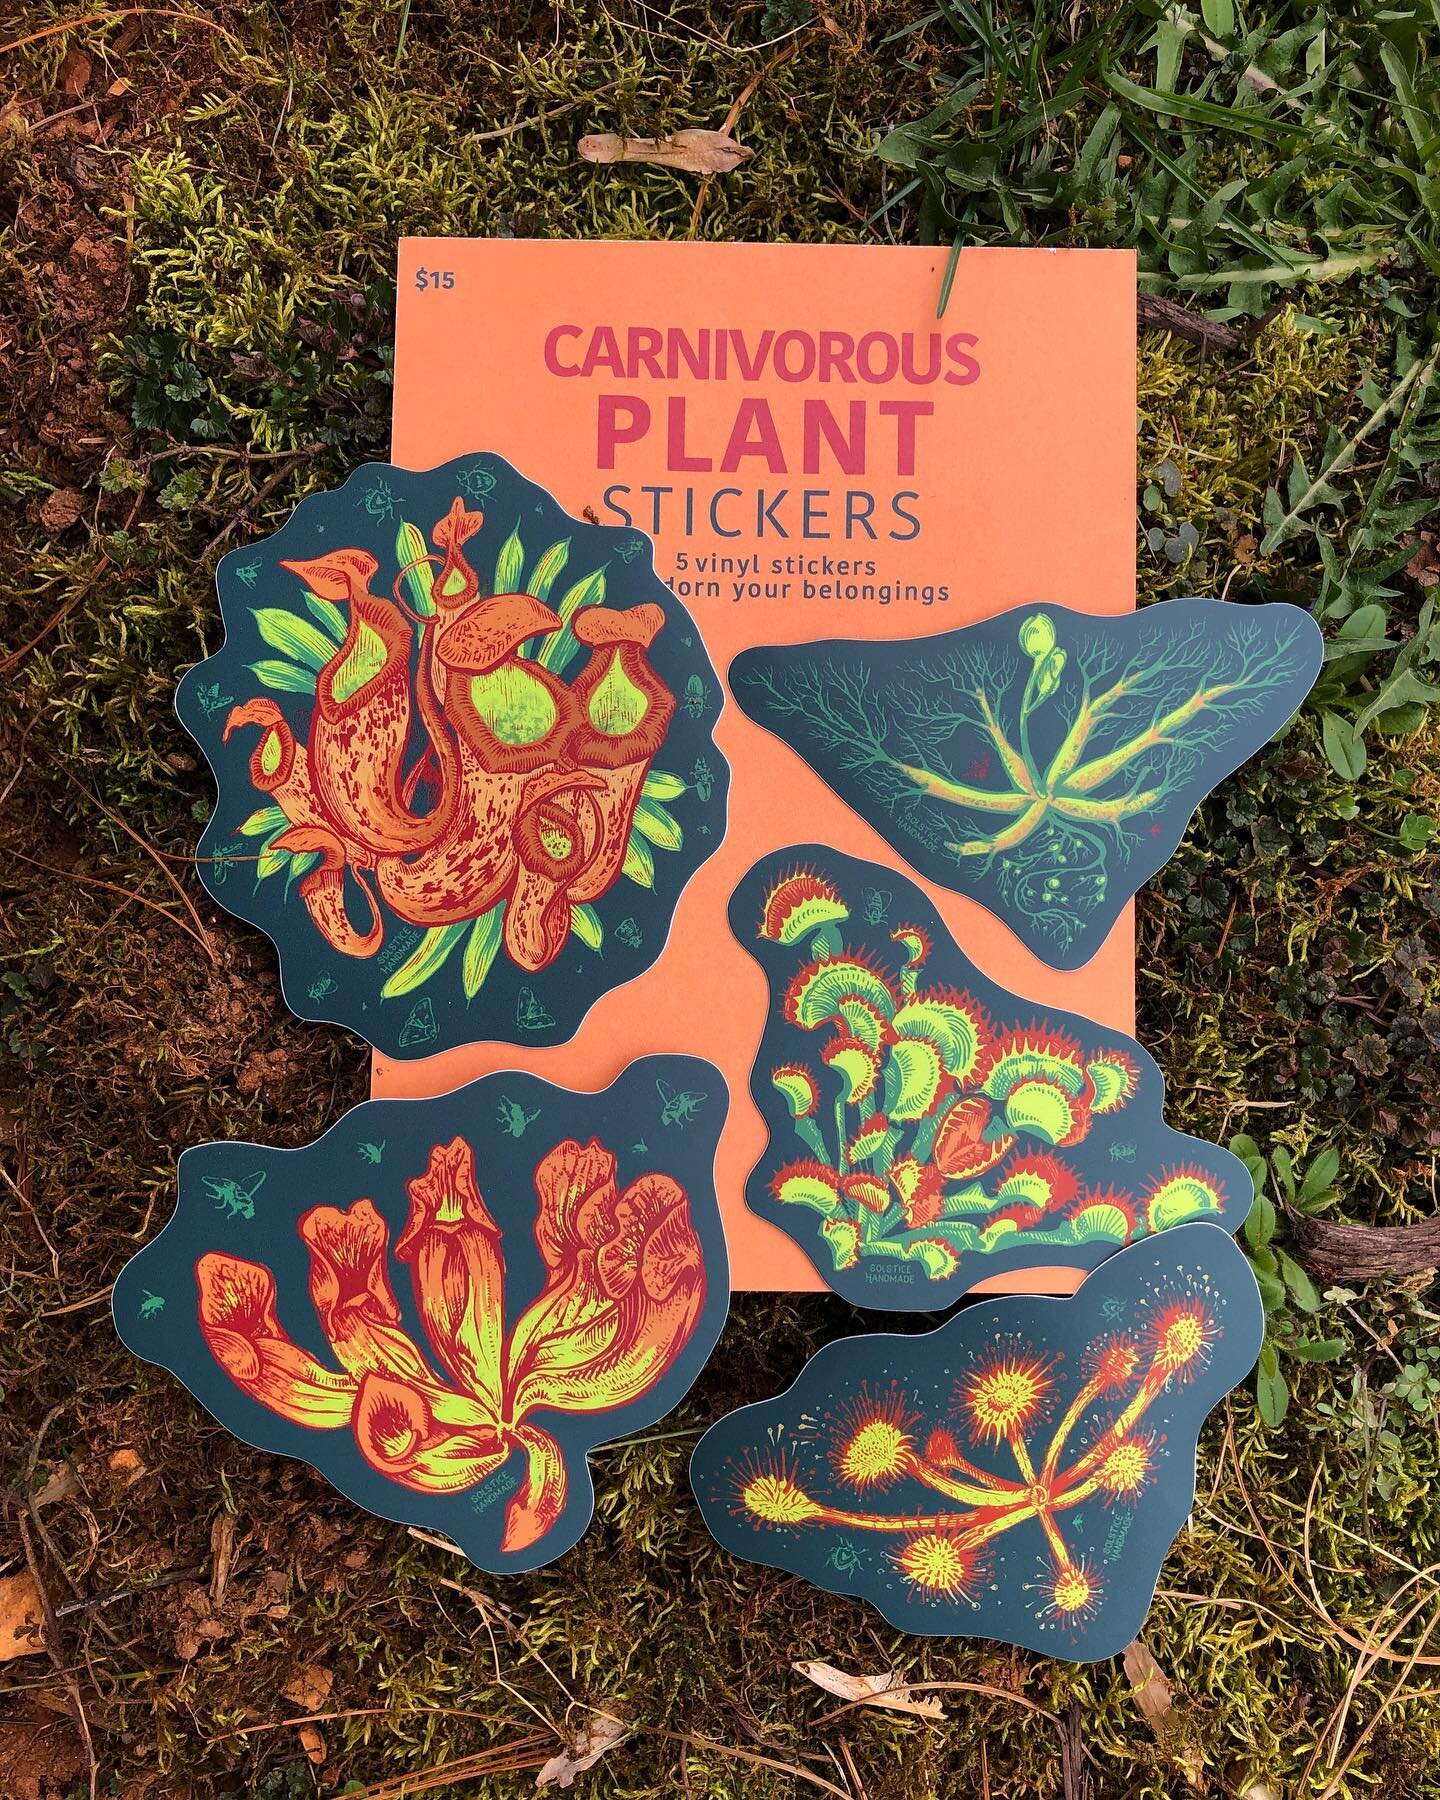 New sticks are here ✨ including carnivorous plants from and old bandana illustration! Can you name the other weird plants 👀

Stickers sh!p for 2 bucks in a letter envelope 💌